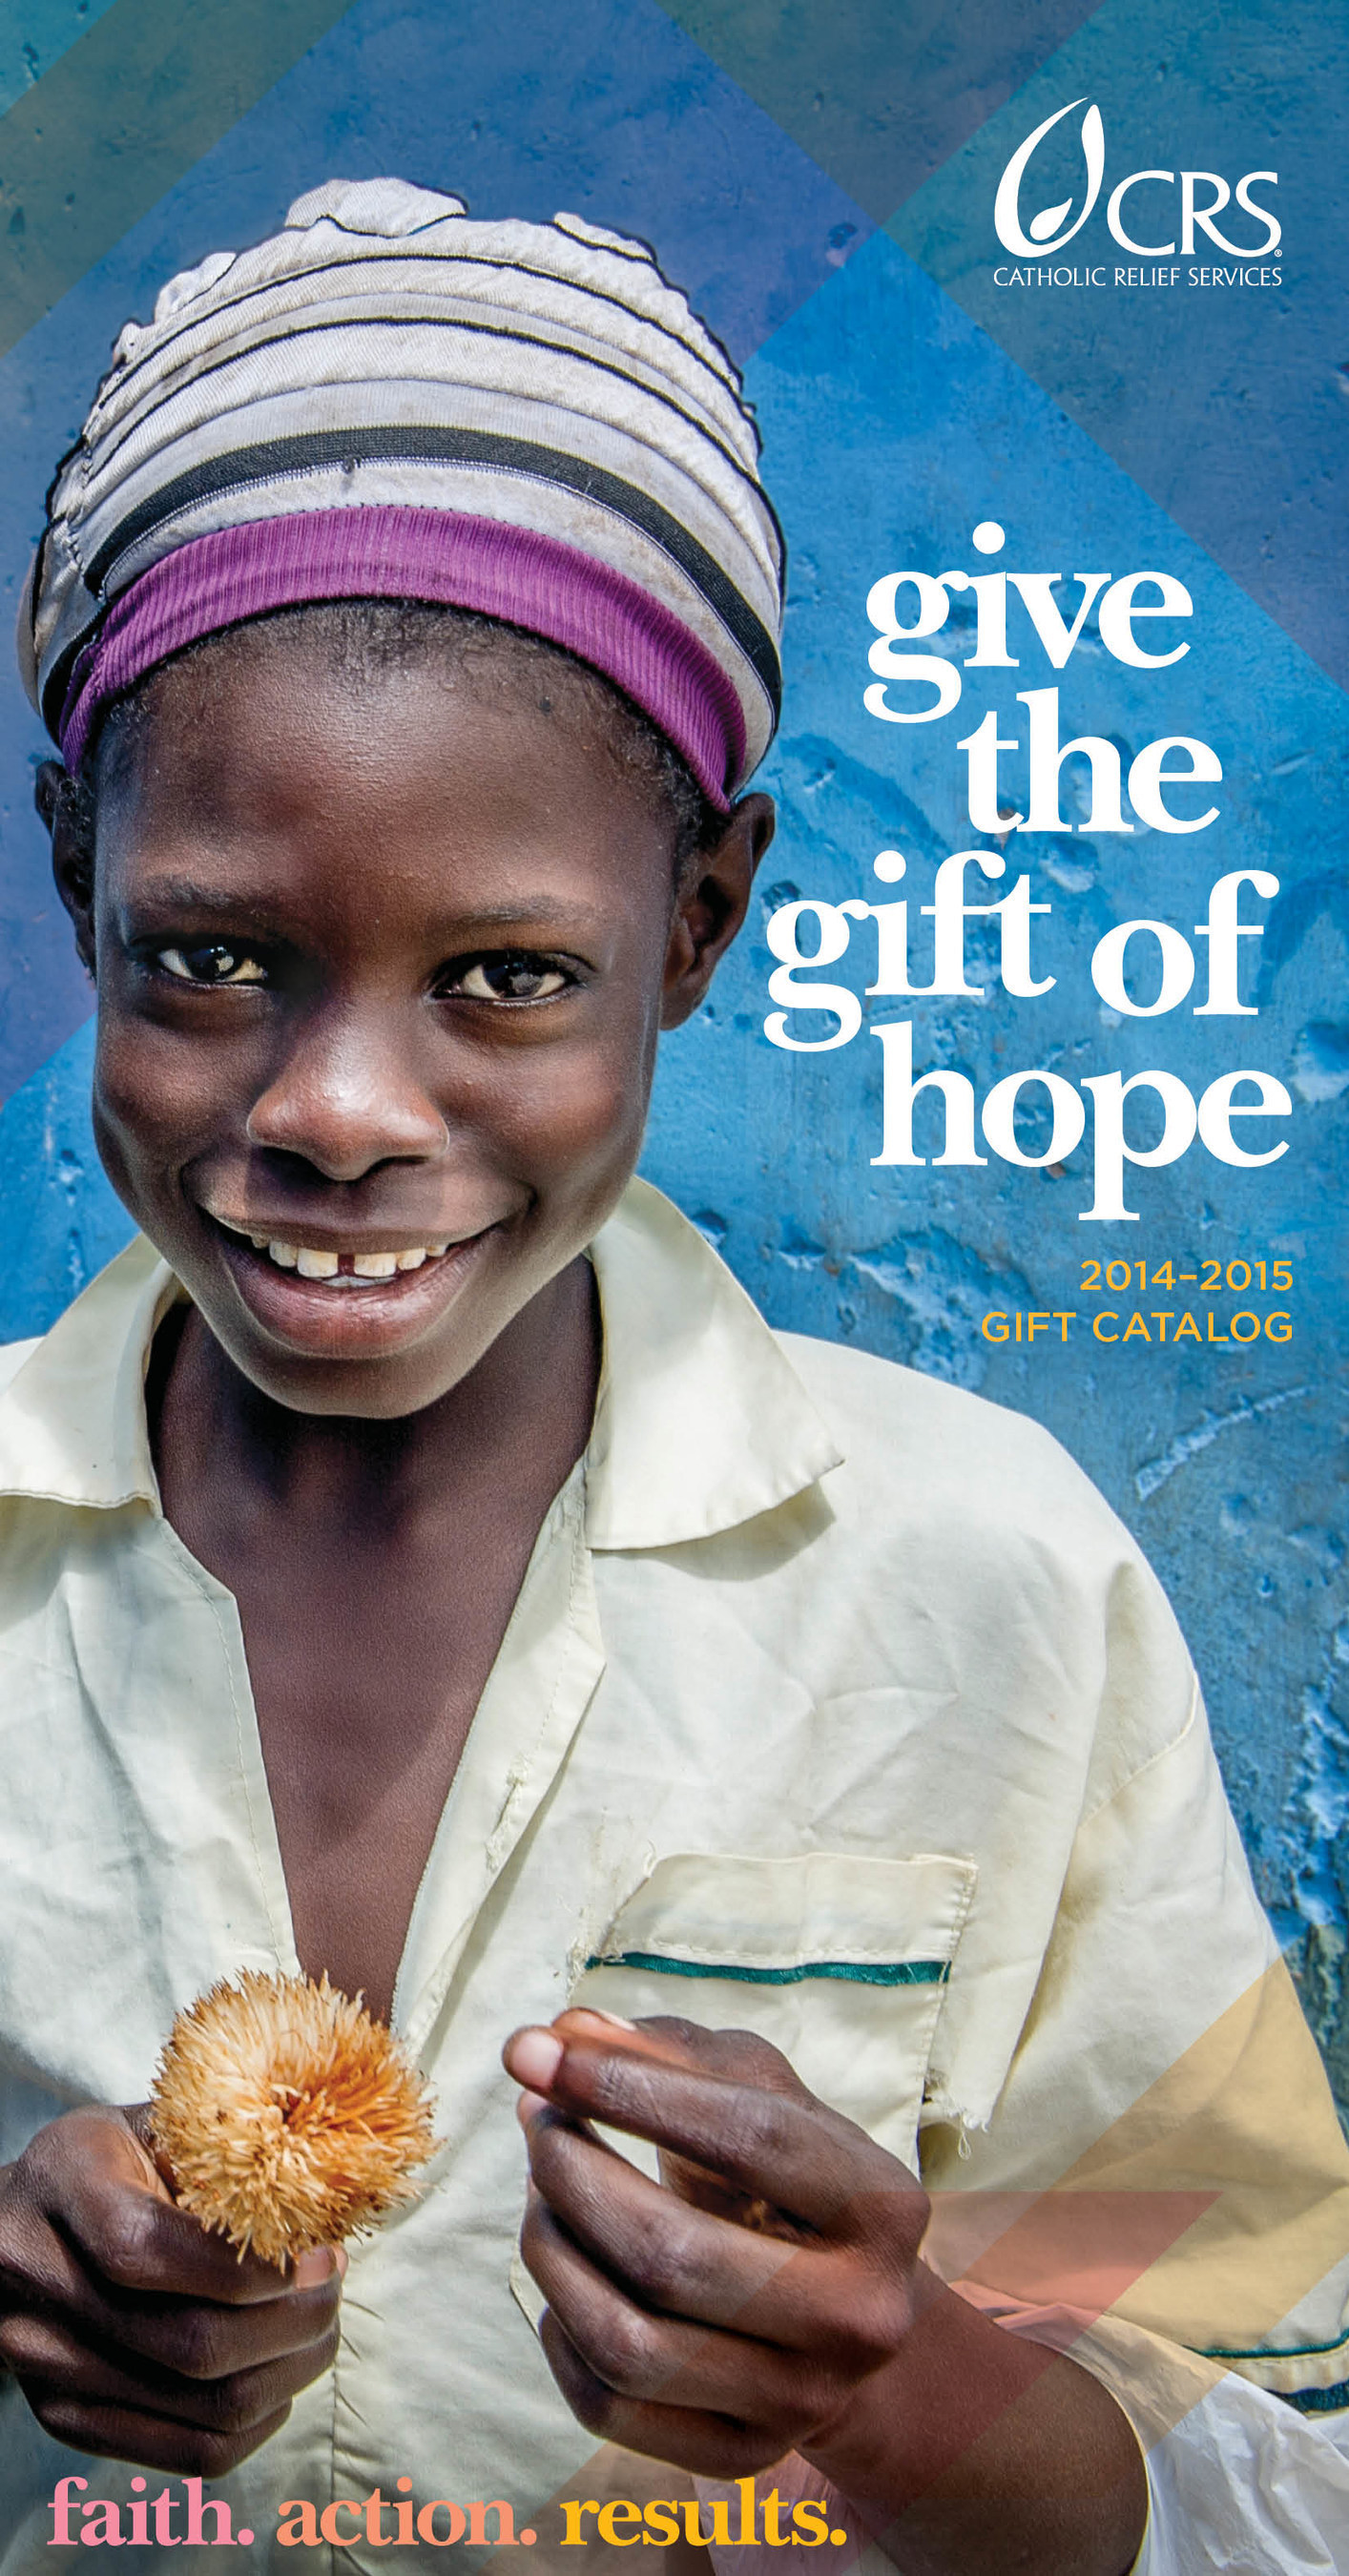 Let your gifts do a world of good this holiday season.